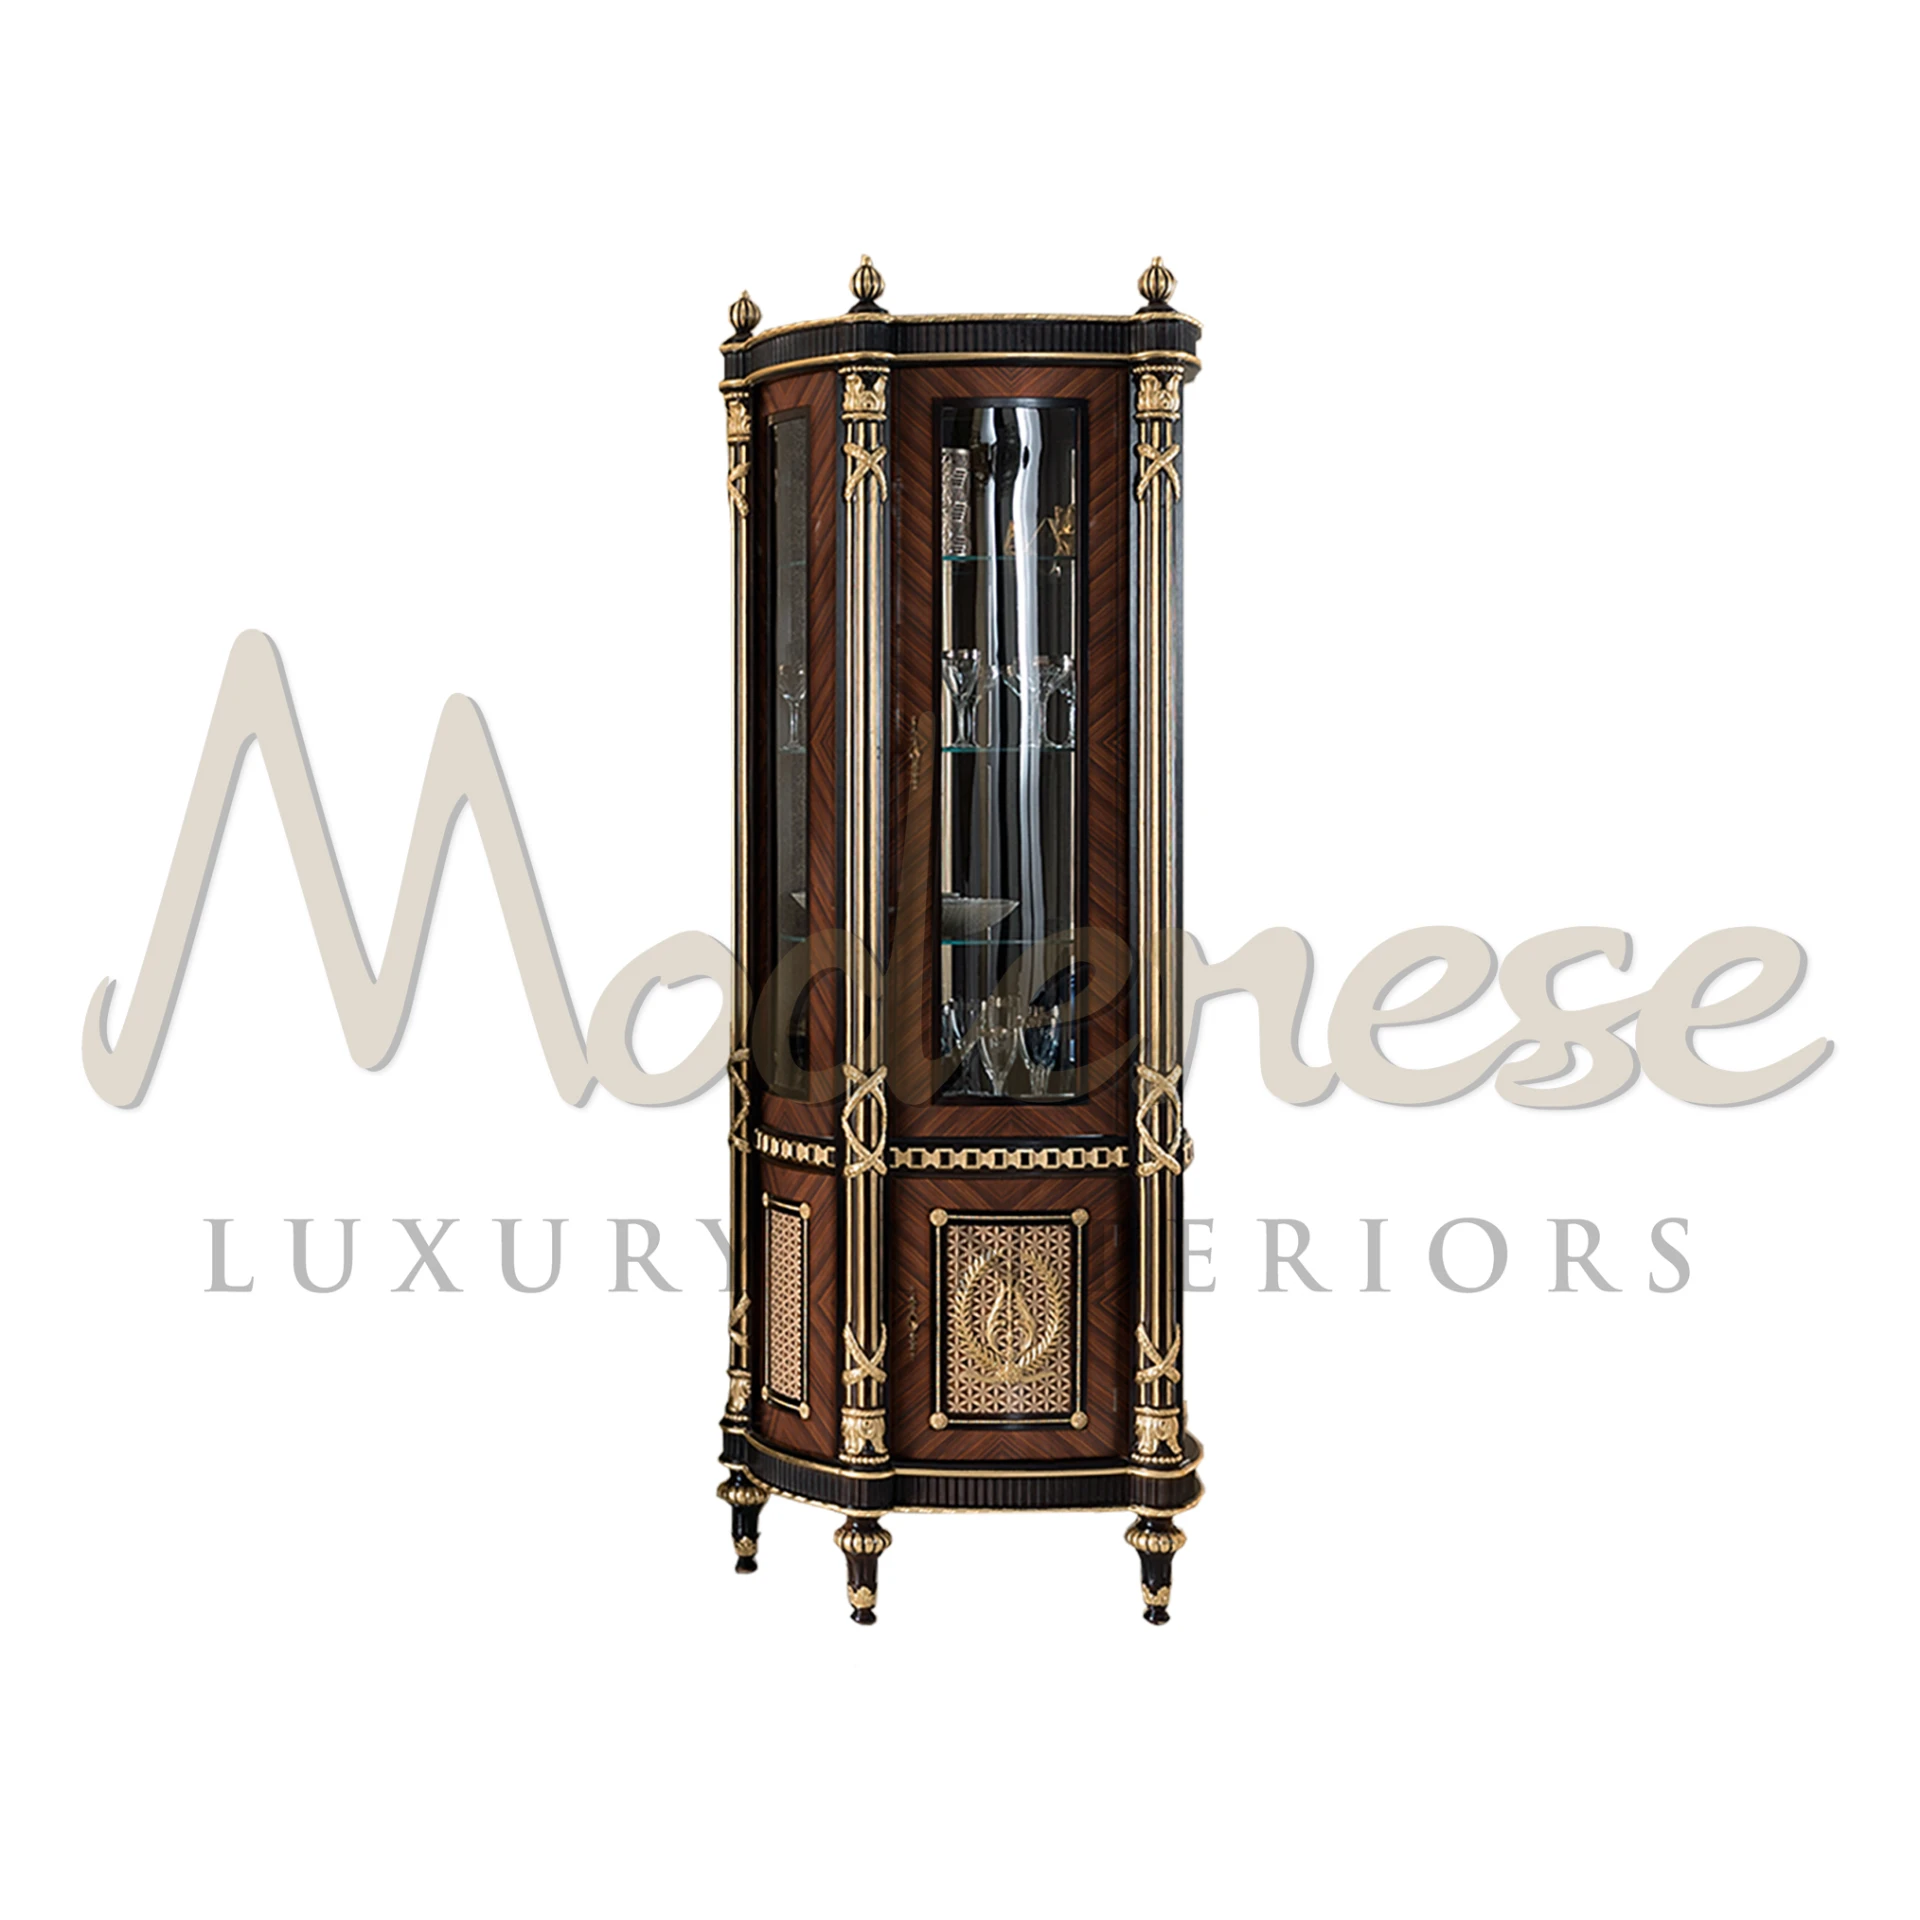 Experience your home's interior with Modenese Luxury Interior's stunning creation. Featuring empire-style legs, golden carvings, dark columns, and sleek glass details.